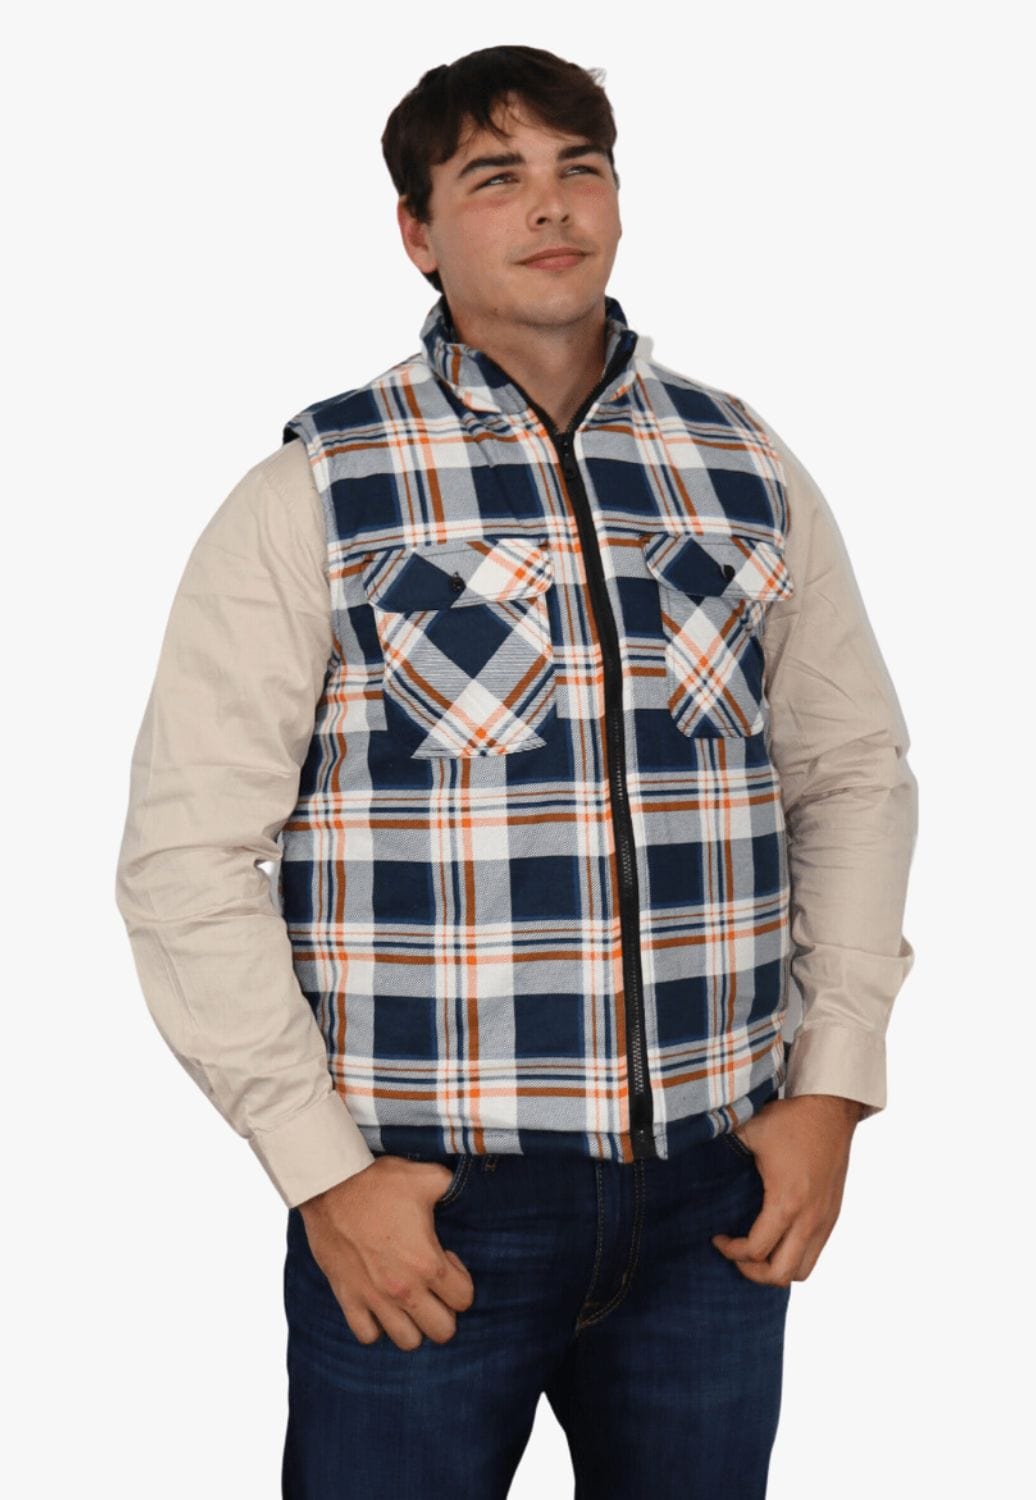 Ritemate CLOTHING - Mens Vests Ritemate Quilted Flannelette Vest